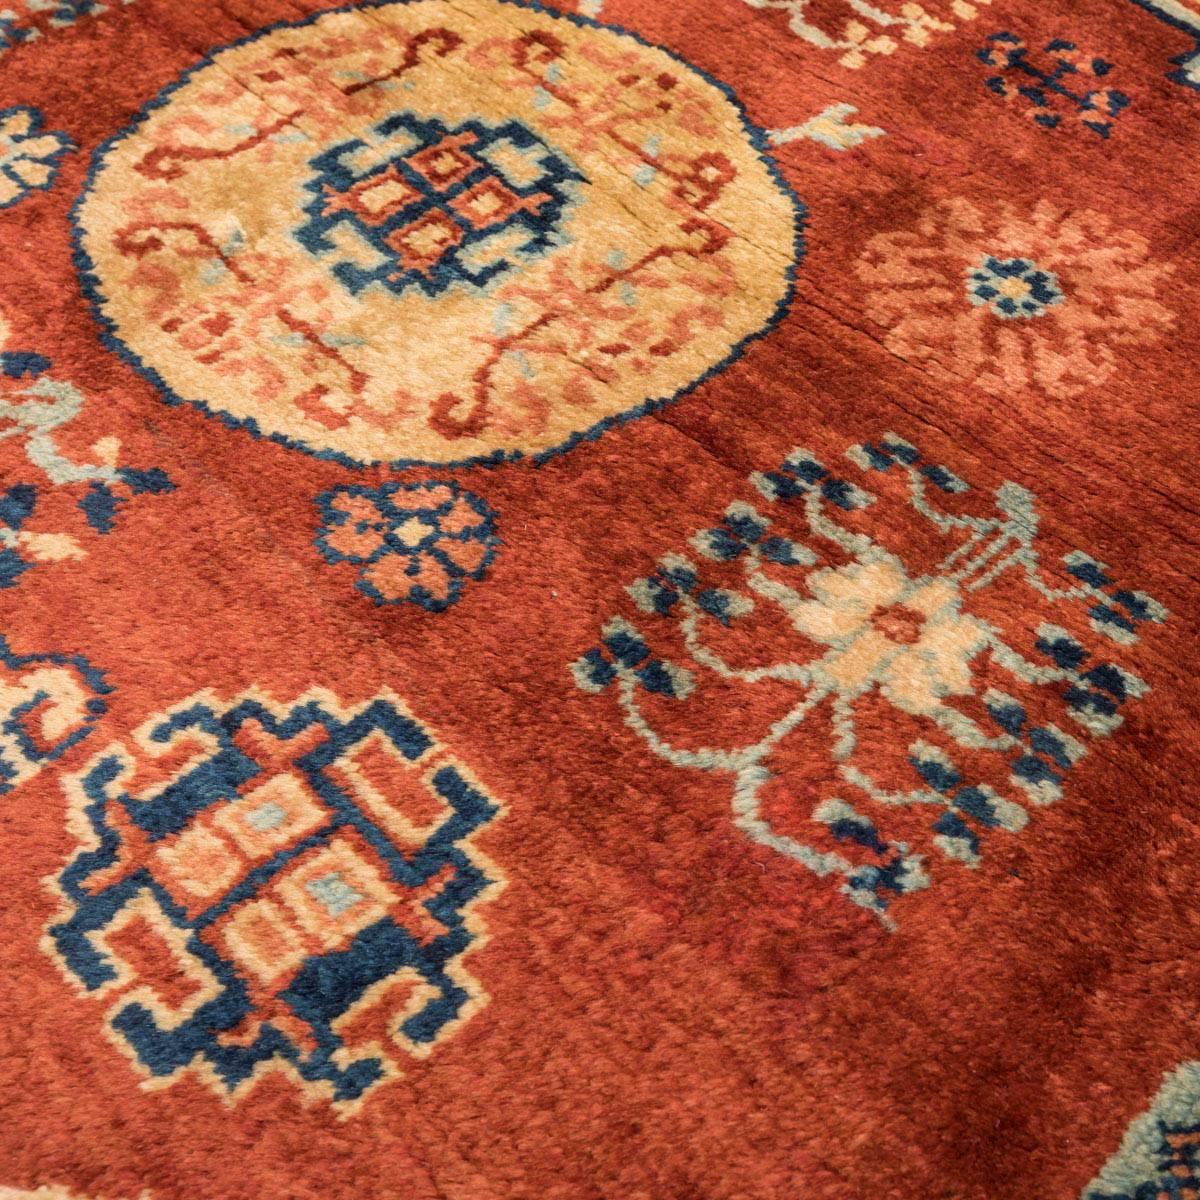 Early 20th Century 20th Century Samarkand Wool Caramel Color Rug Kothan Design circa 1900. For Sale